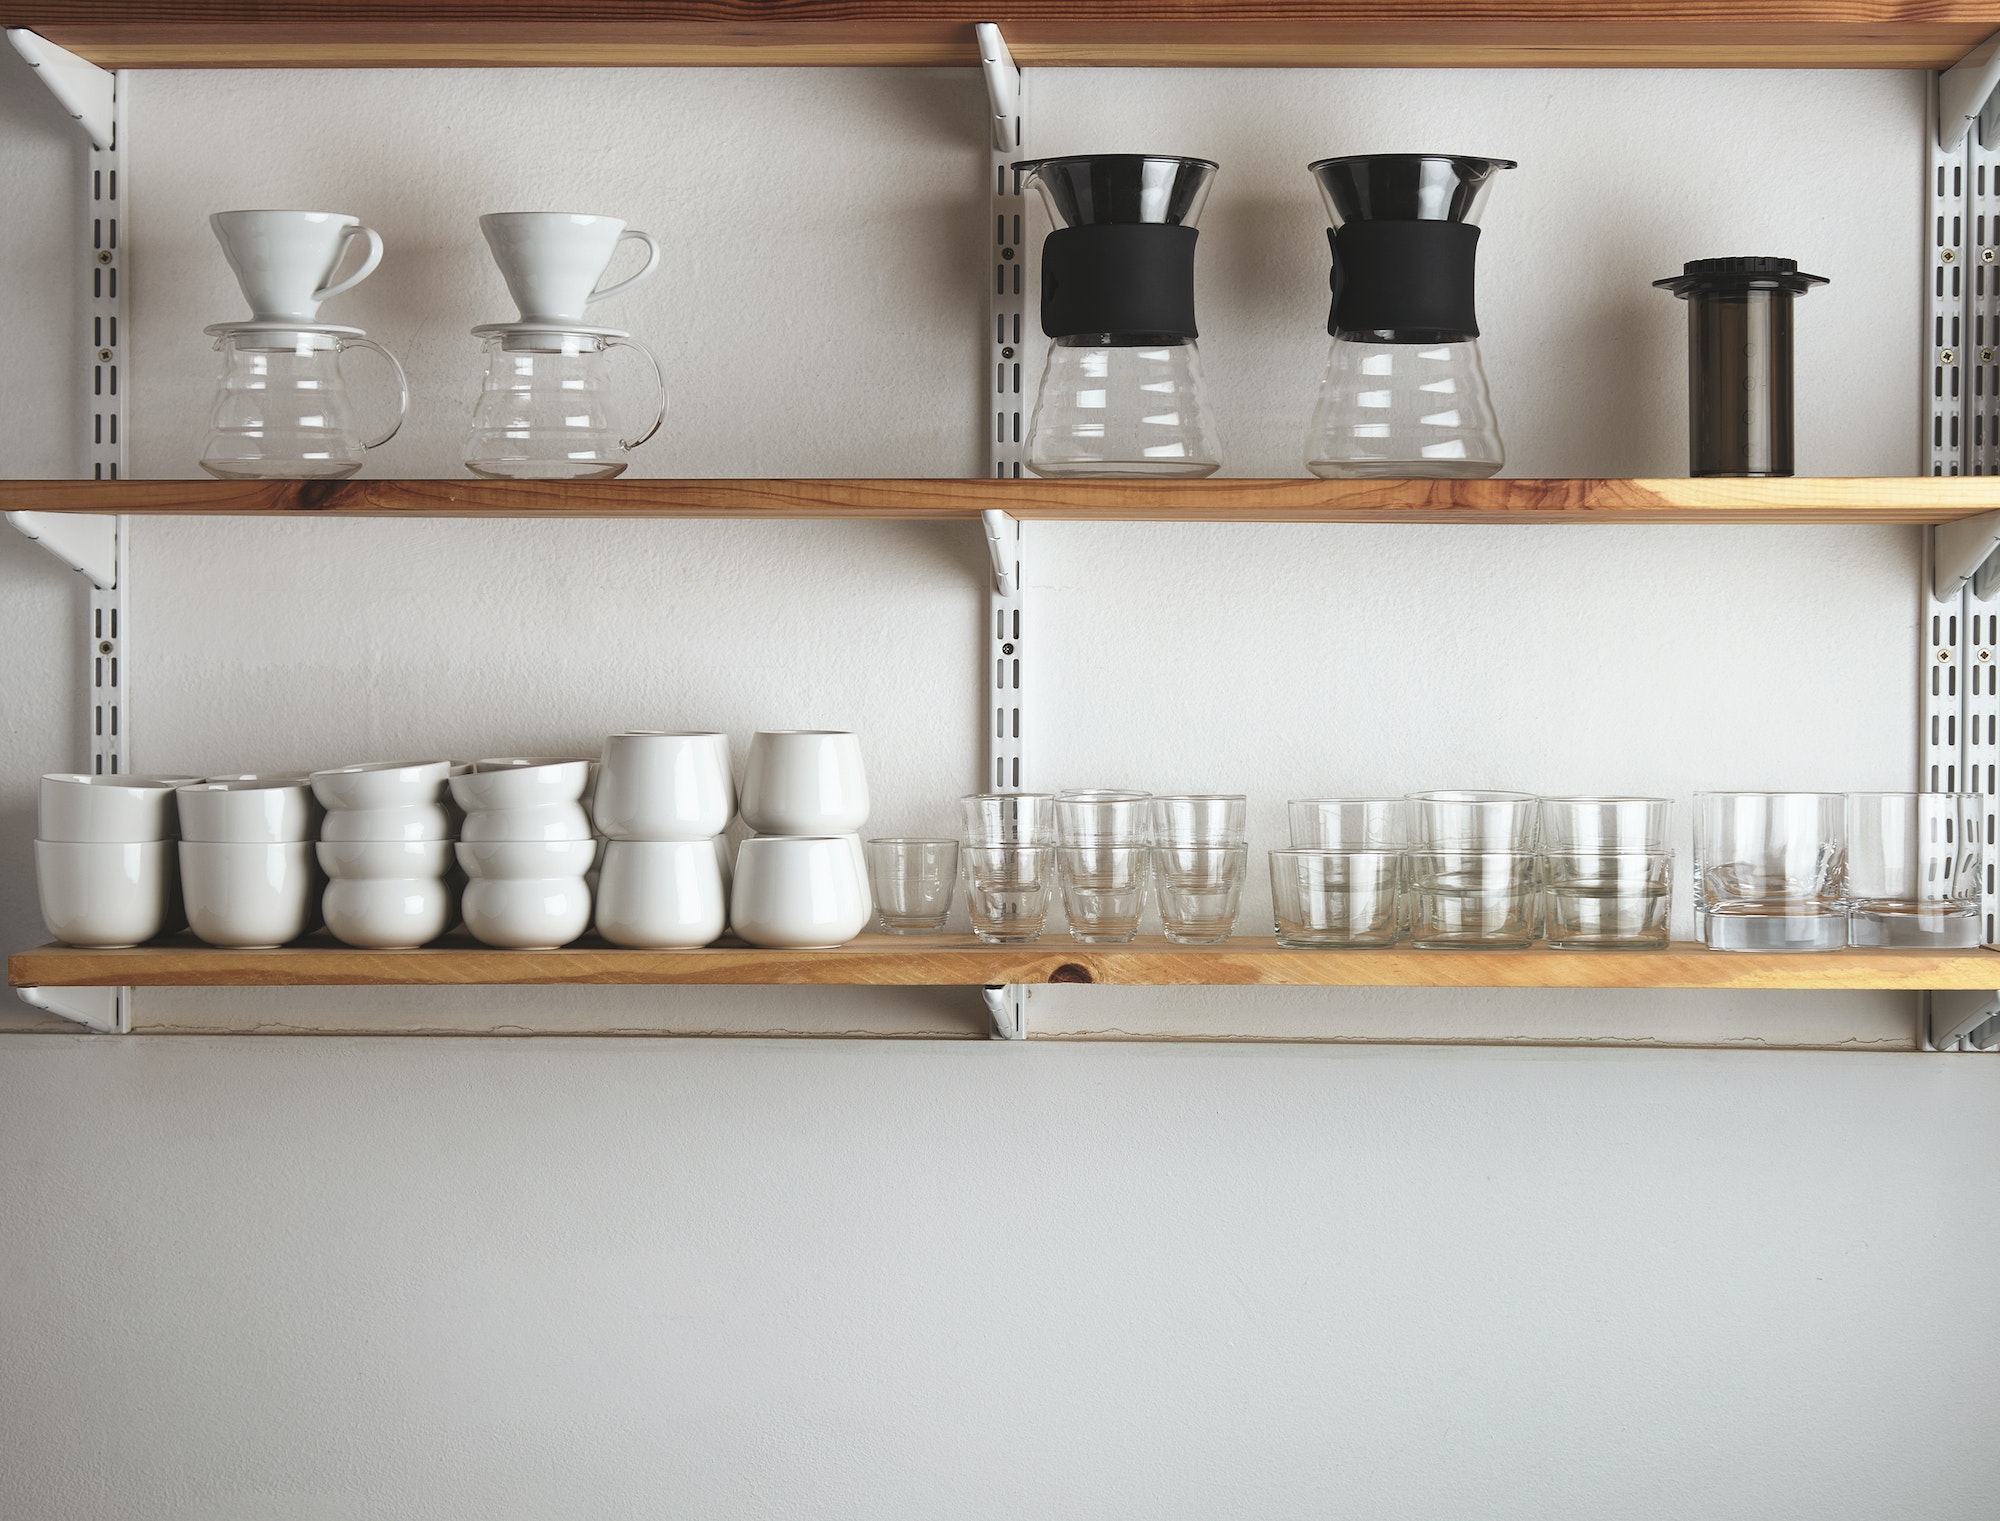 Shelves with glasses and coffee makers